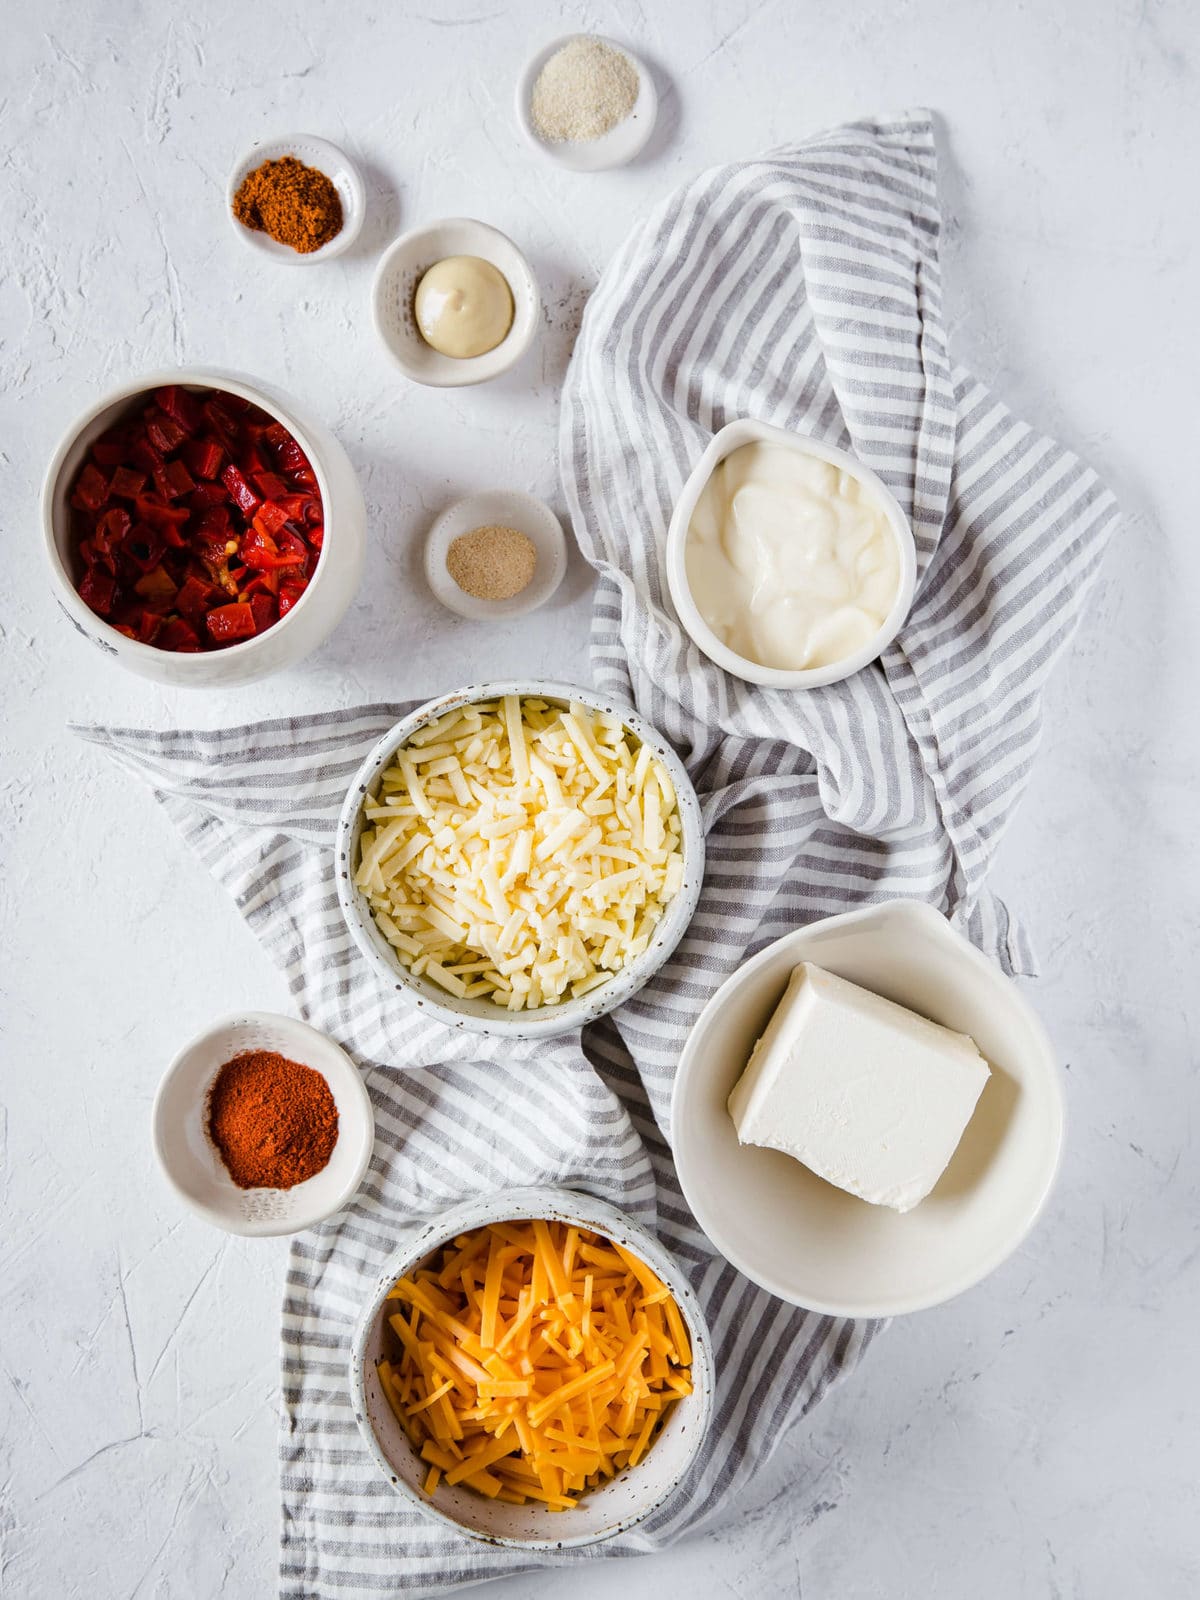 All of the ingredients to make Pimento Cheese Dip: shredded cheddar, shredded sharp cheddar, cream cheese, mayonnaise, cayenne, paprika, garlic powder, onion powder, Dijon mustard, and chopped pimento peppers.